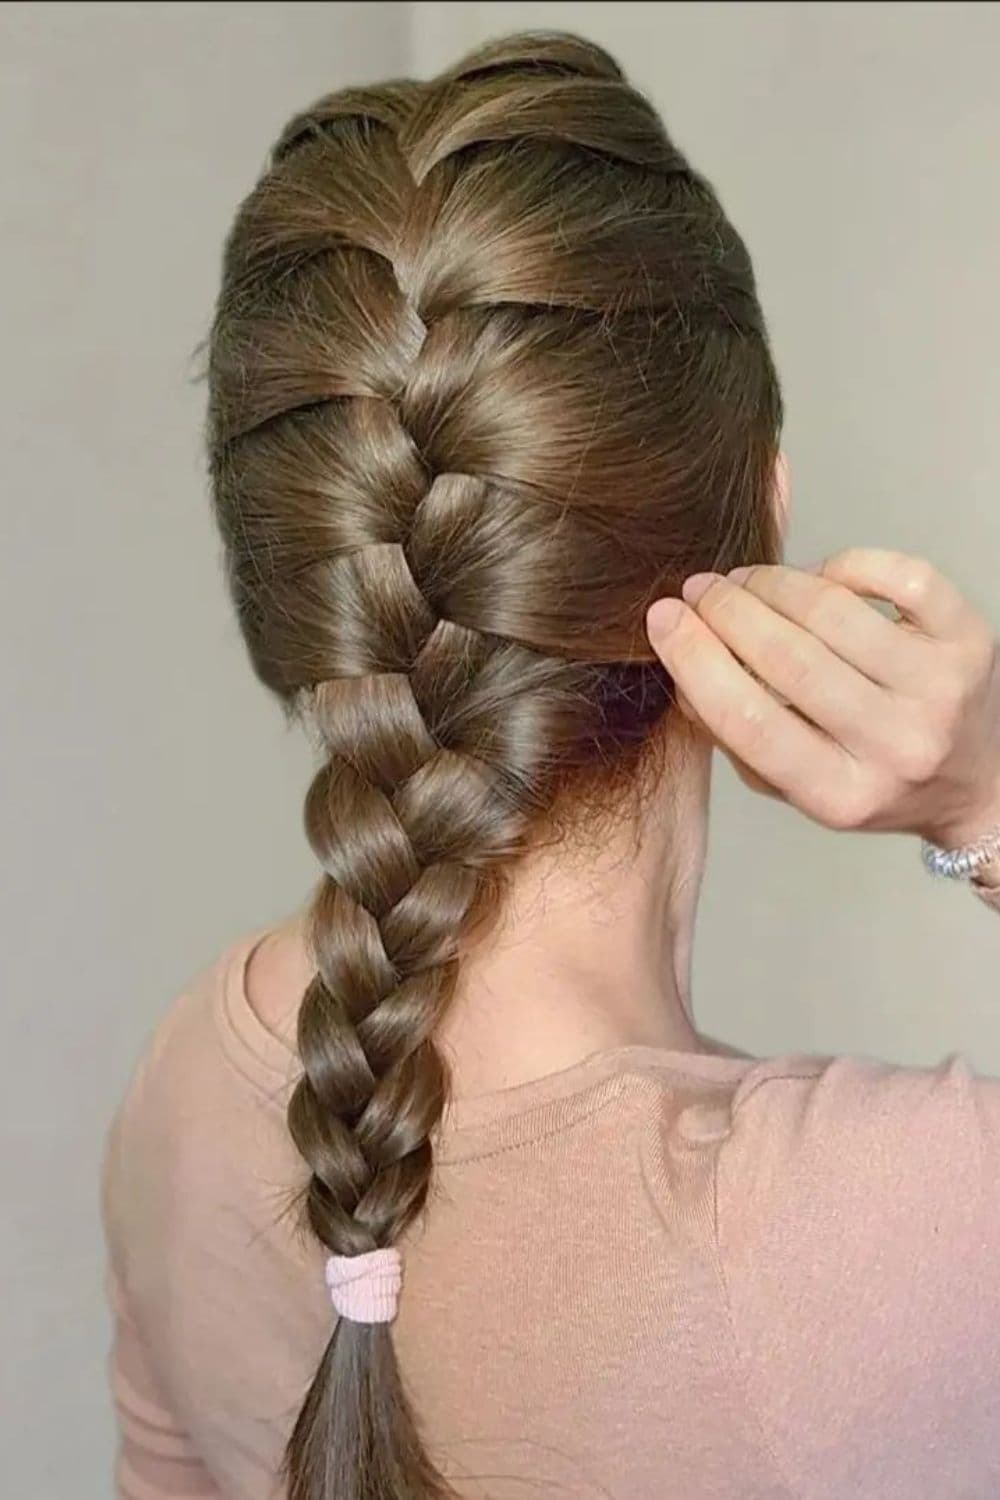 A woman with brown French braids.